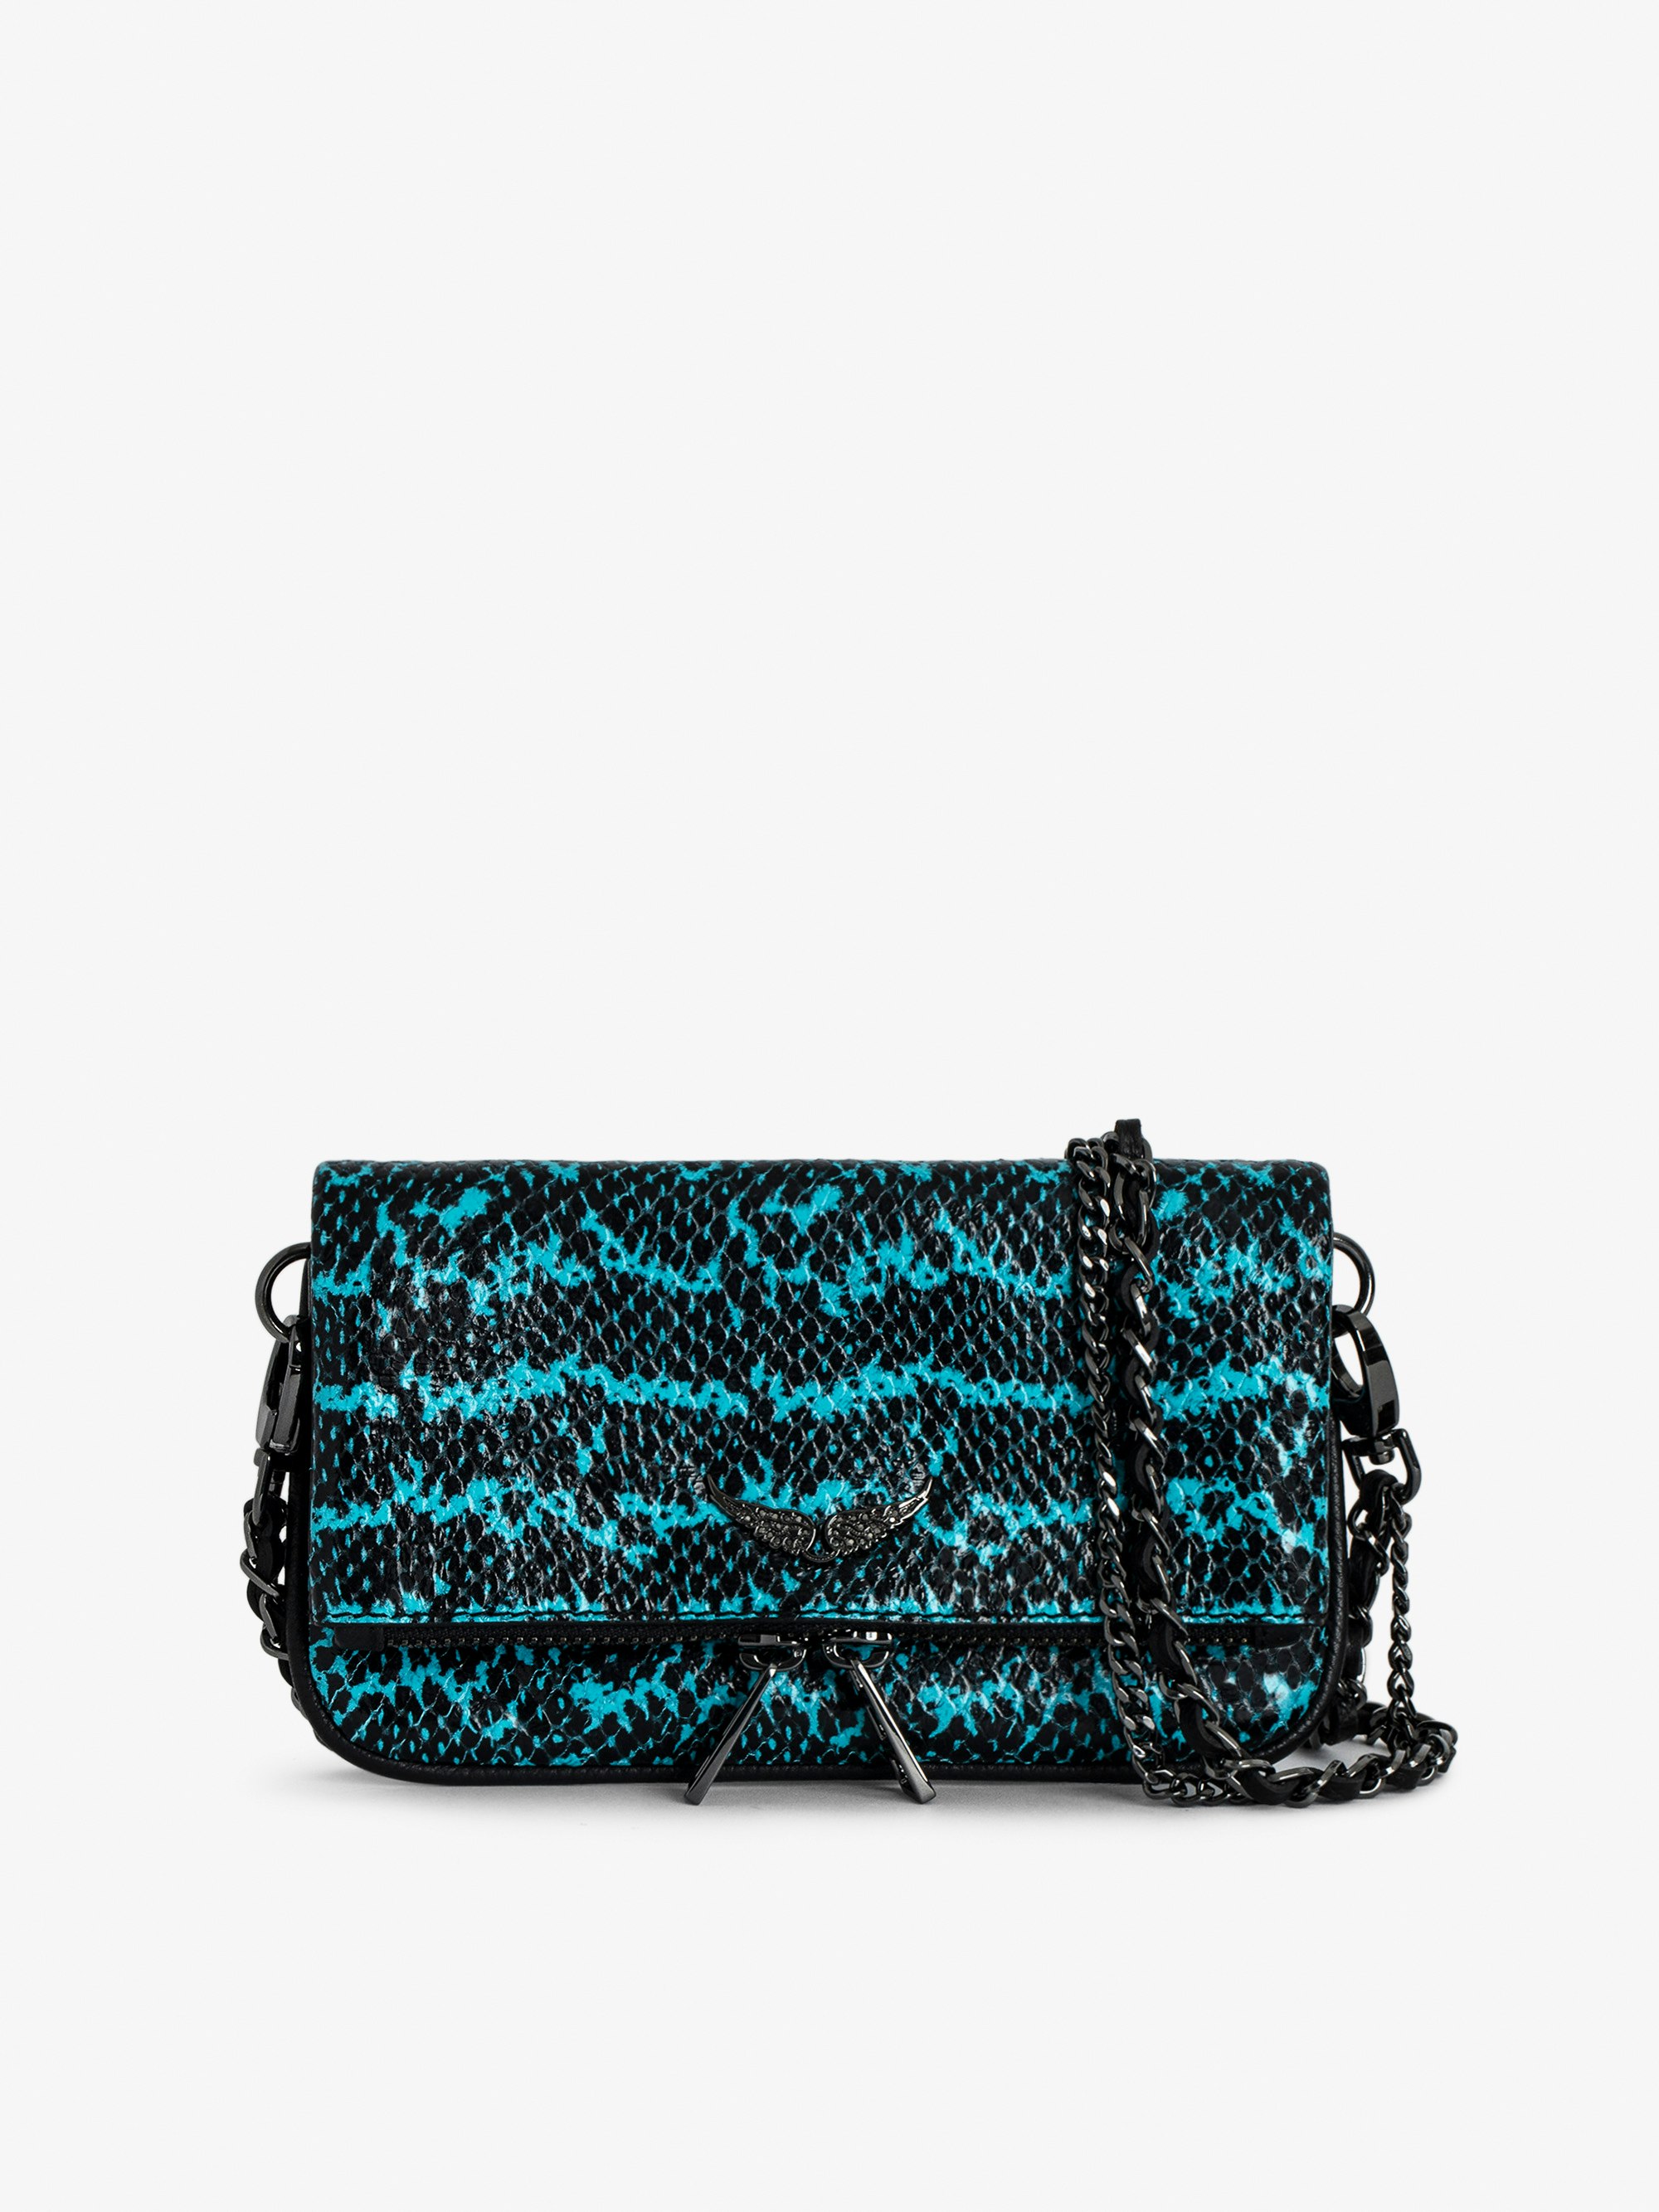 Rock Nano Wild Clutch - Small blue snakeskin-effect leather clutch with double chain and signature wings.